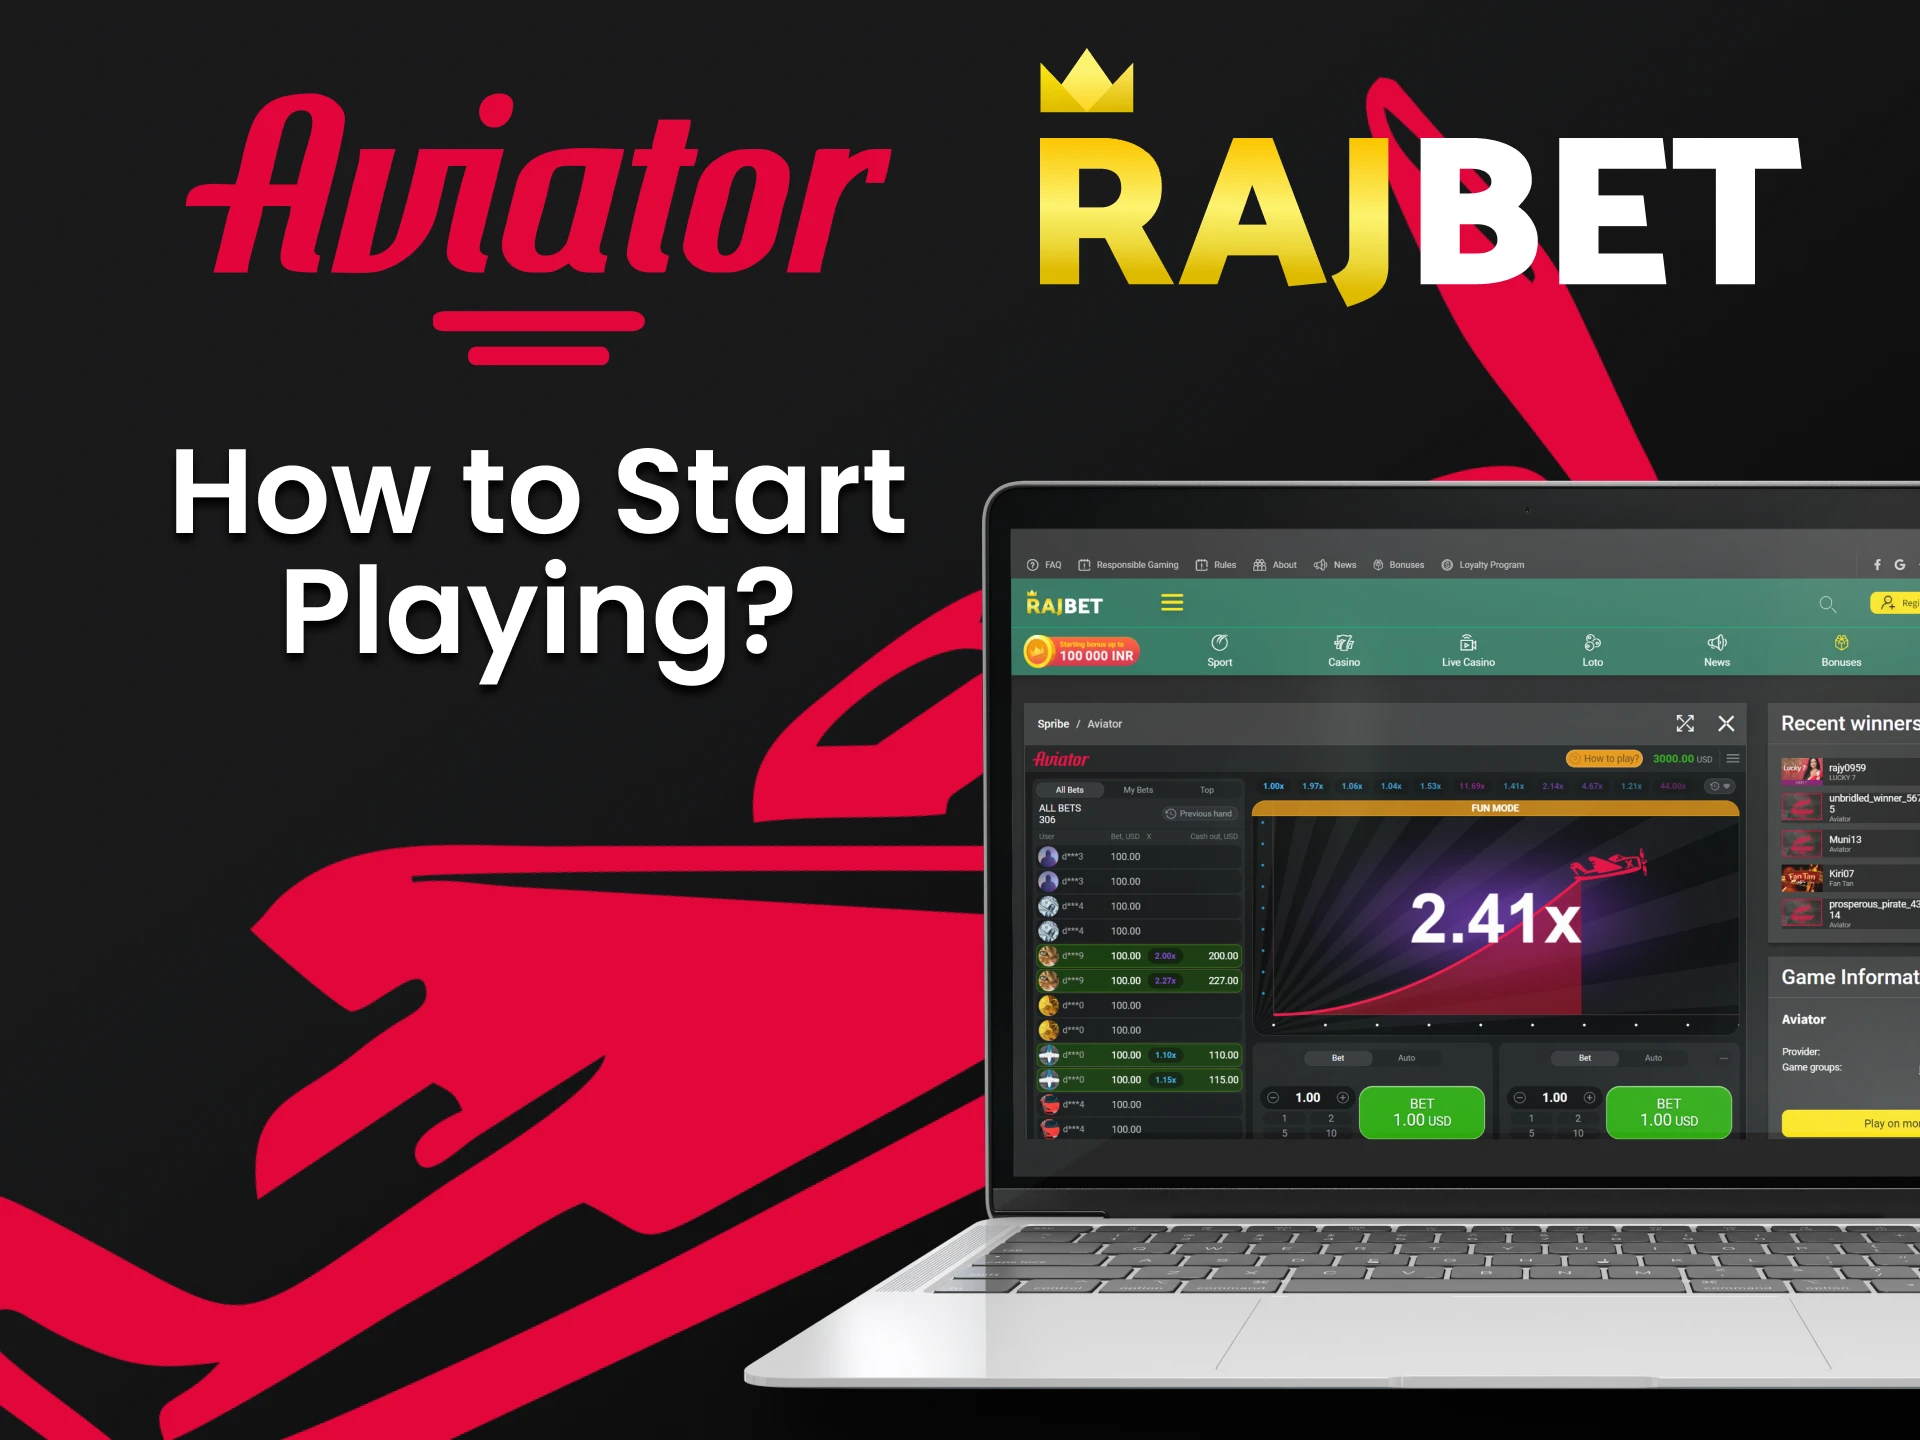 Find out how to start playing Aviator on Rajbet.